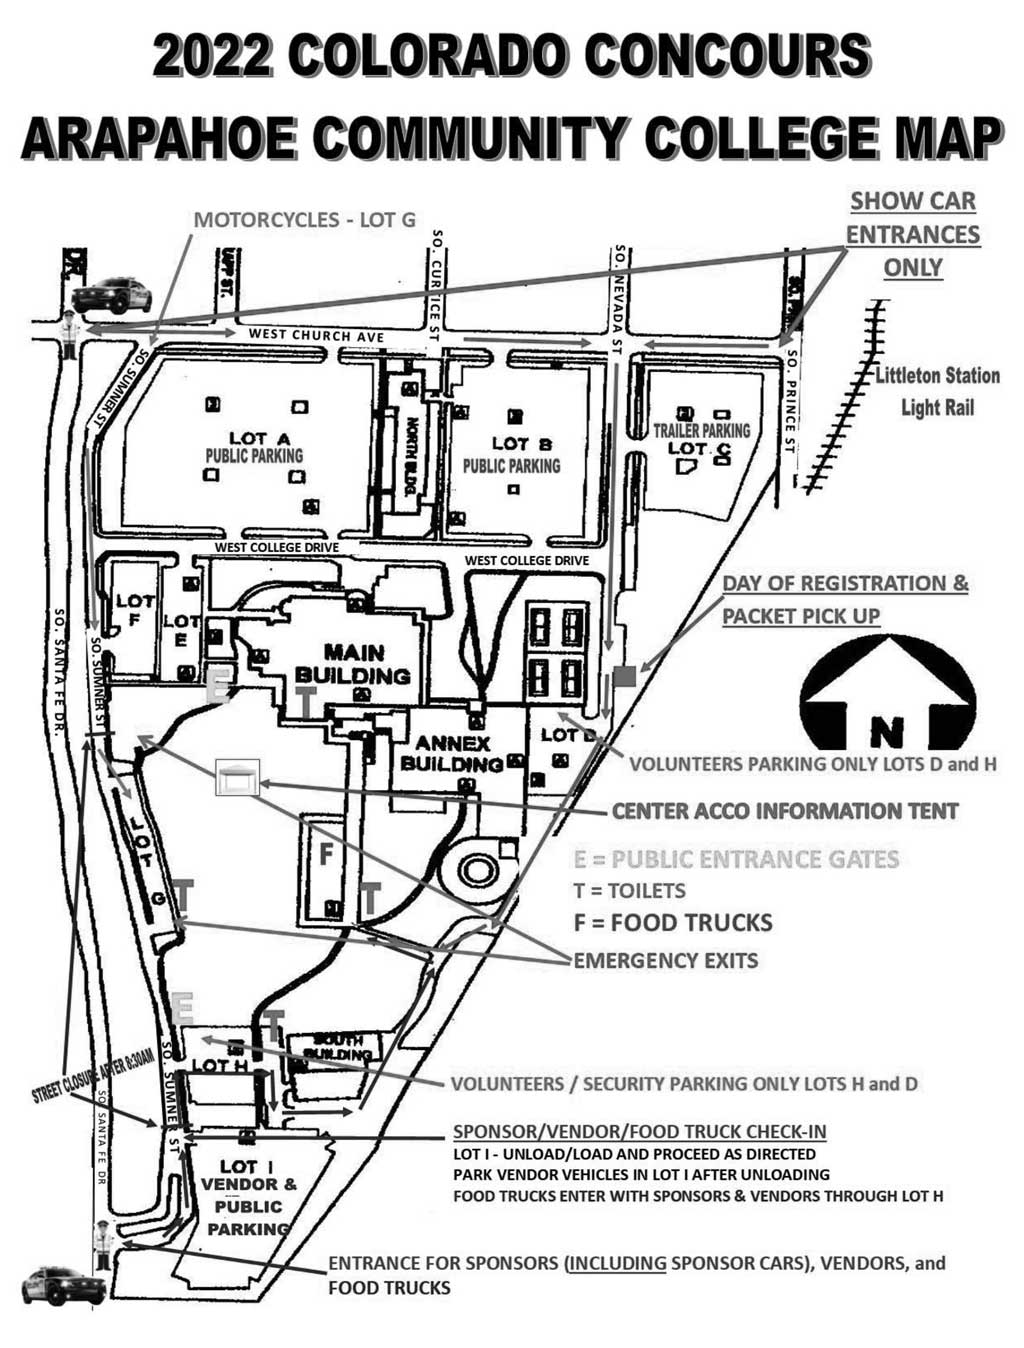 Event and Parking Map of the Colorado Concours and Car Show